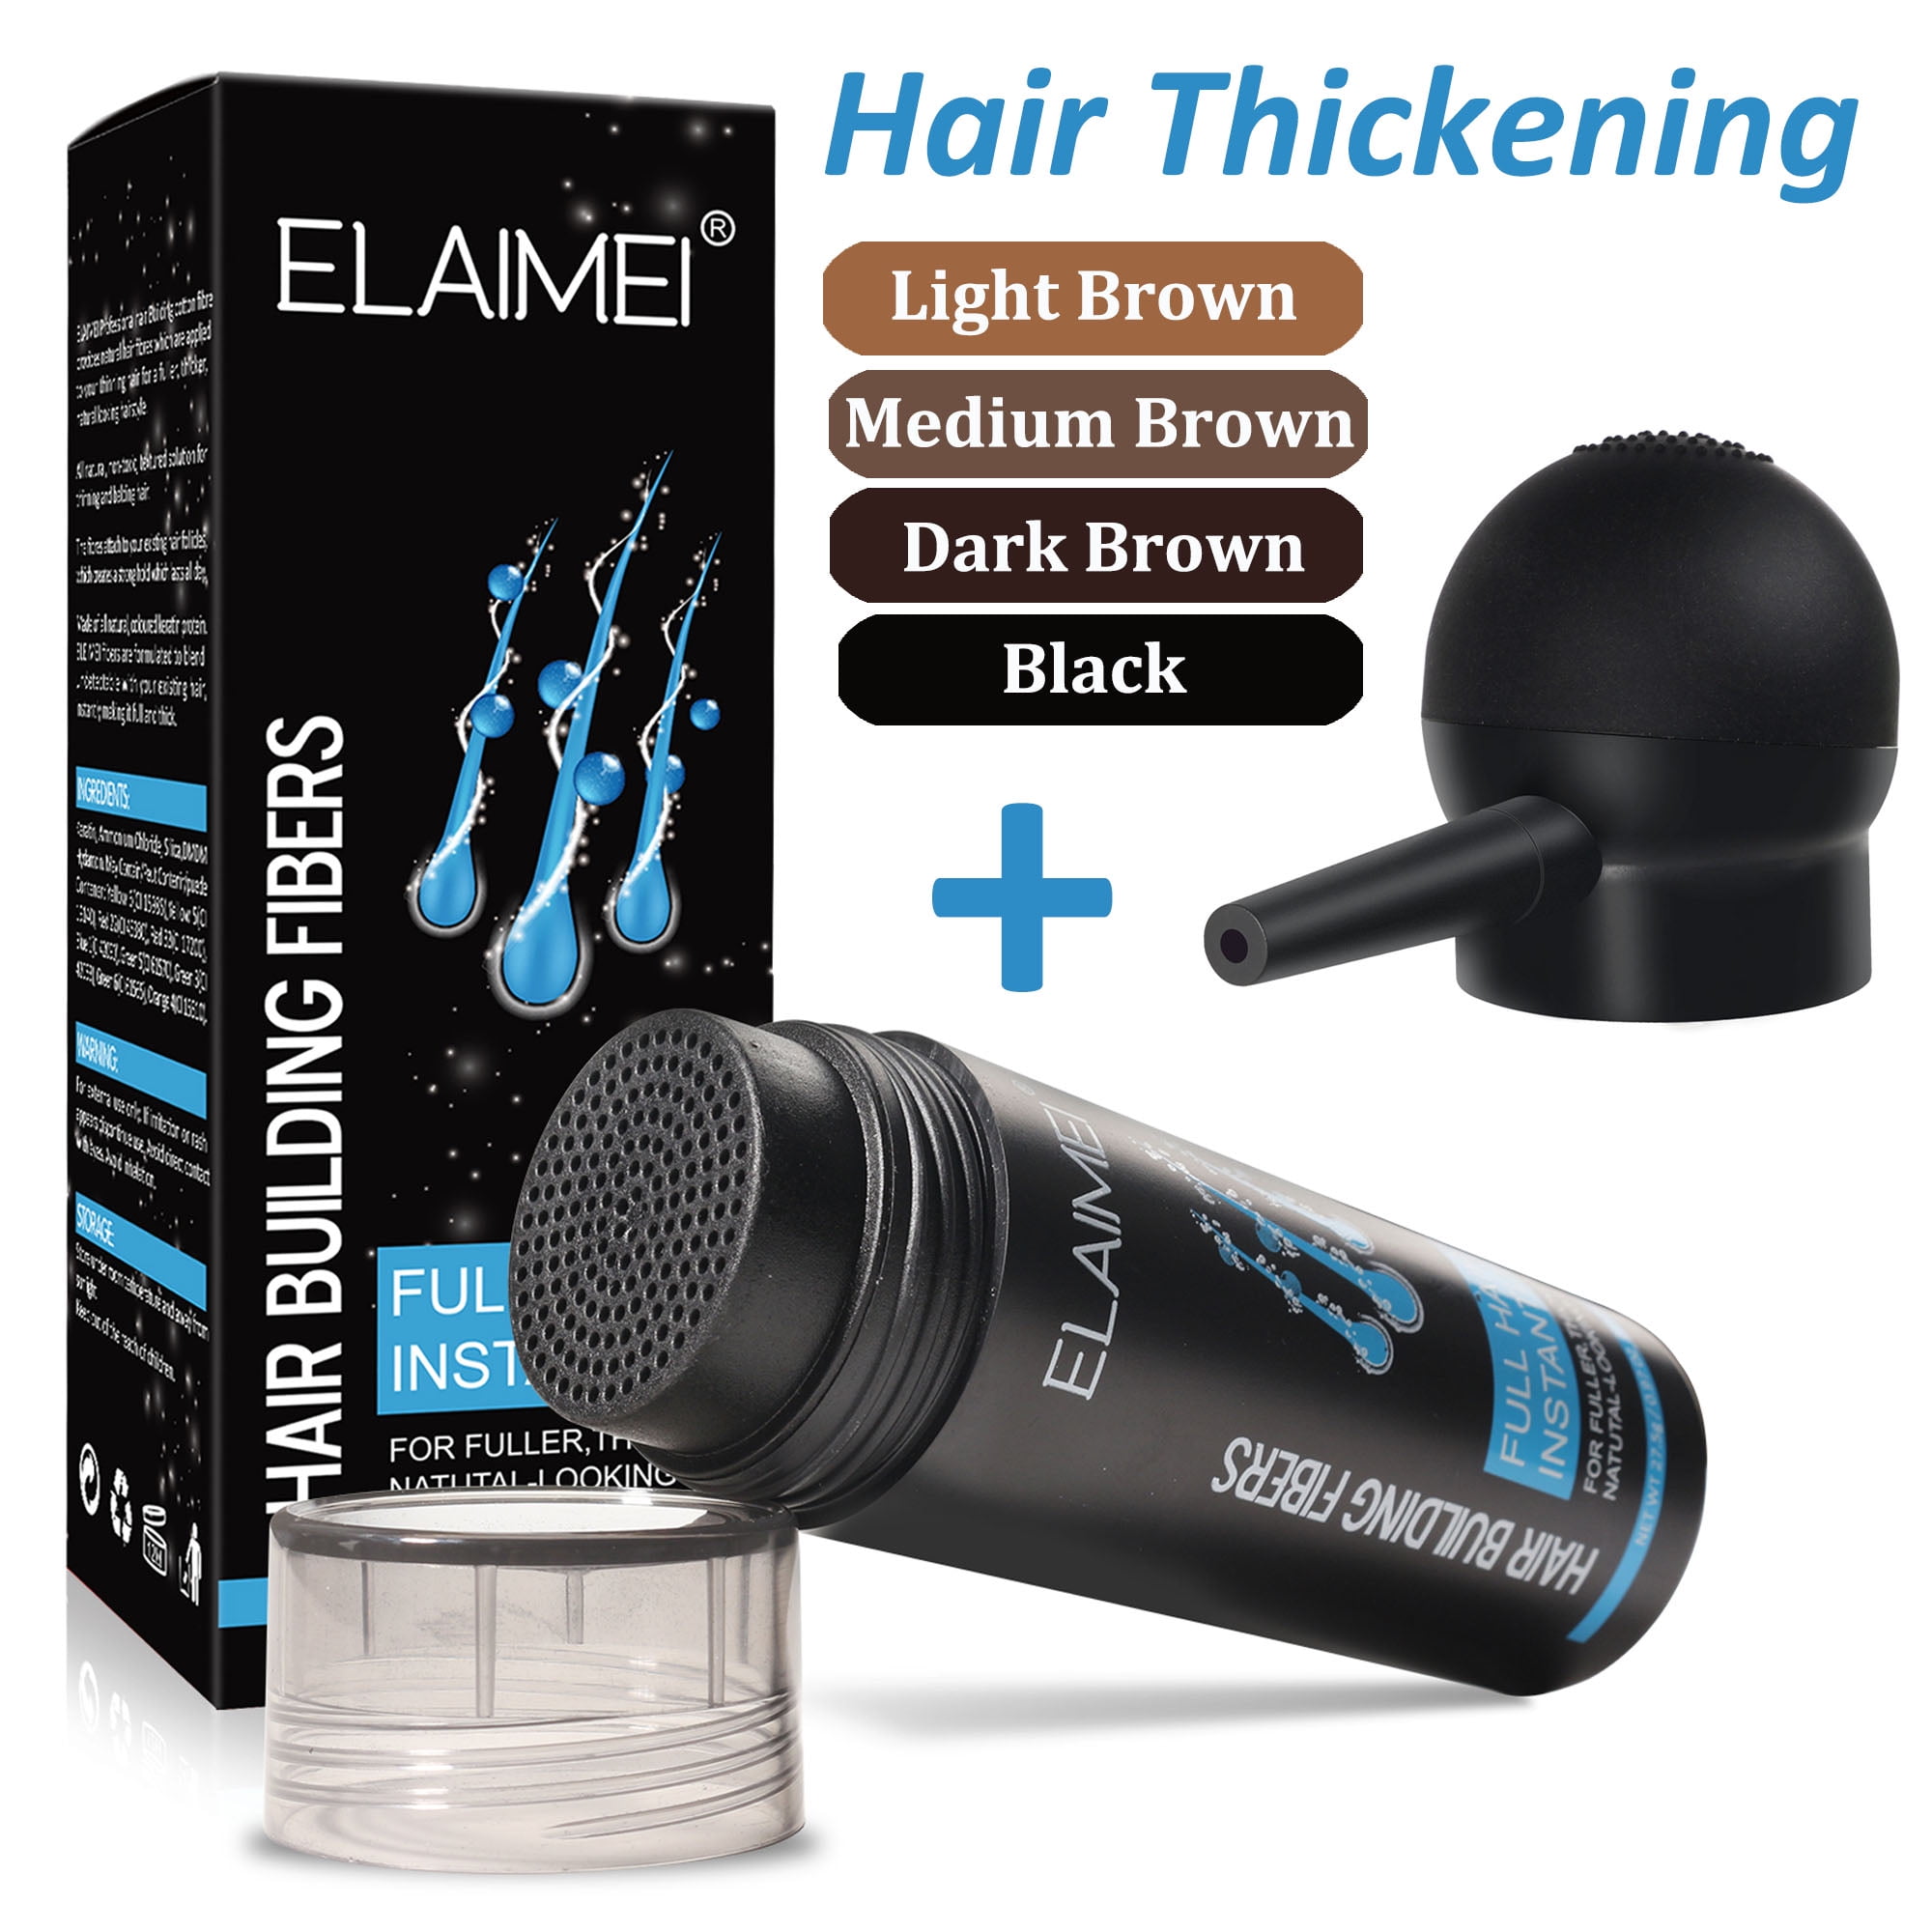 Elaimei Hair Building Fibers for Thinning Hair - Dark Brown, Natural  Formula Hair Fiber Thicker Hair in 15 Seconds, Instant Conceals Hair Loss  Last All Day 